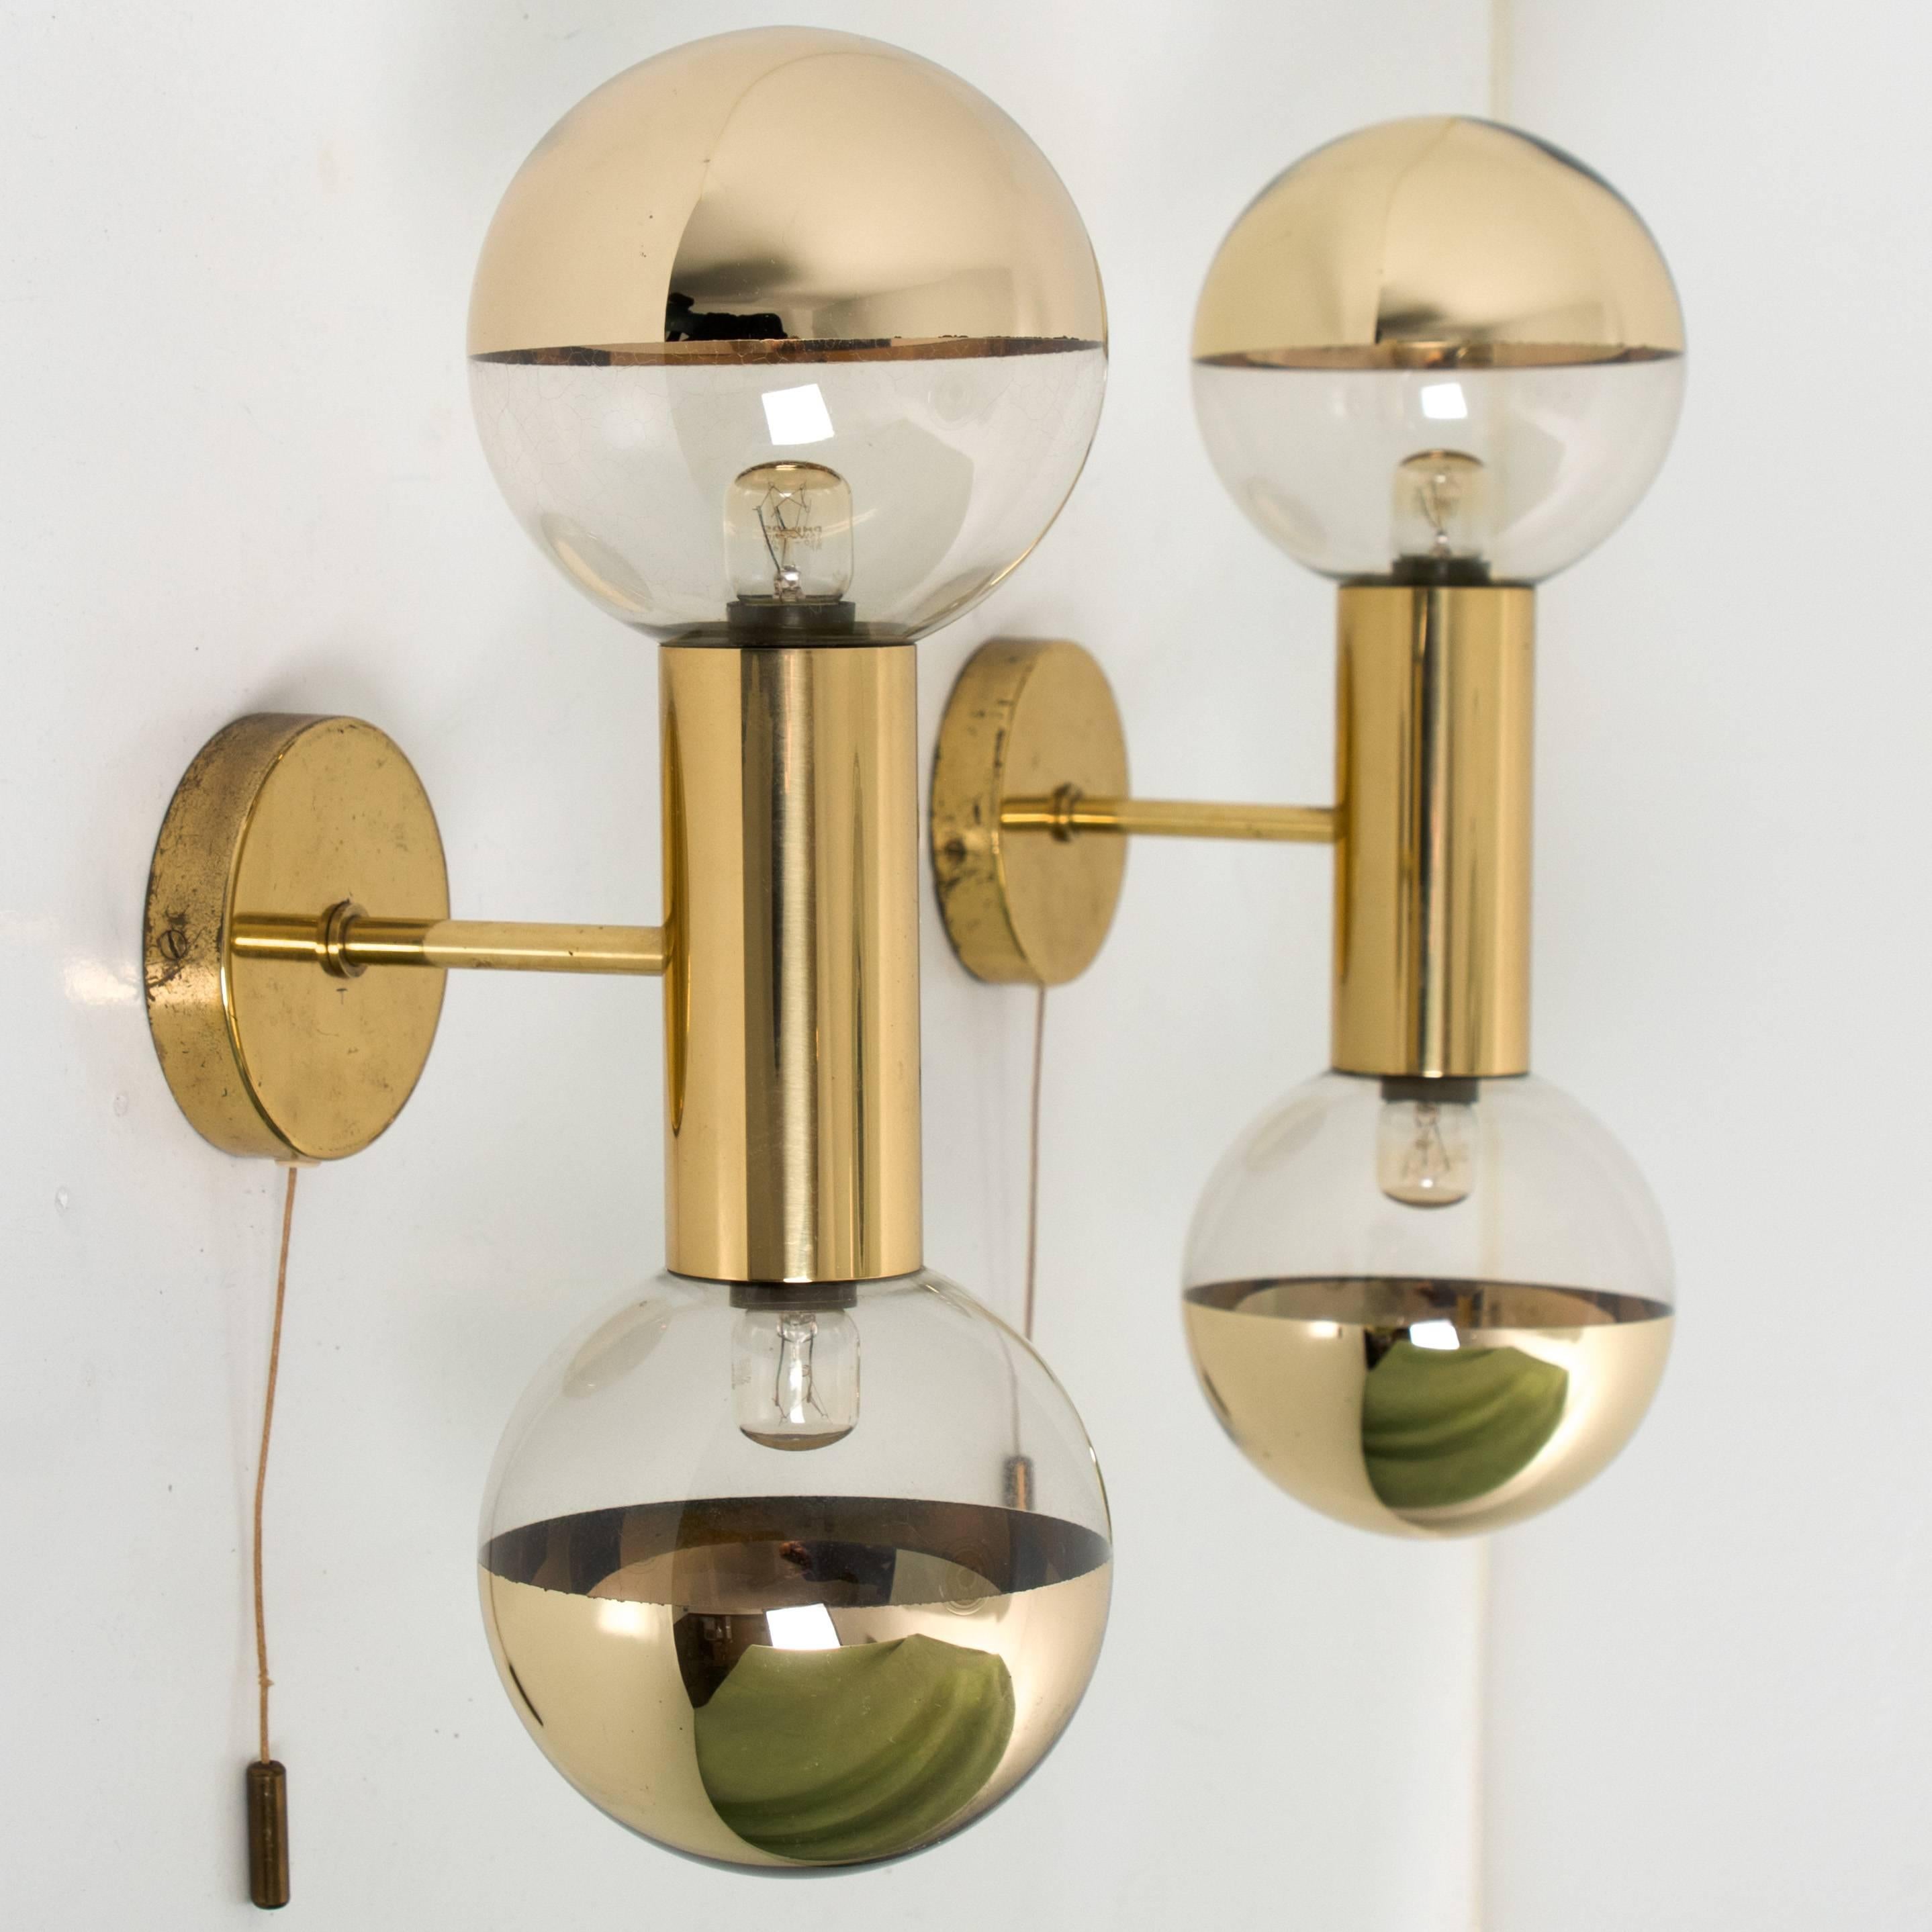 This pair of midcentury wall sconces was designed by Motoko Ishii in the 1970s and later manufactured by Staff in Germany. 

They are made from brass and glass and feature two lights each (two x E14 small bulbs). Heavy quality, cleaned, well-wired